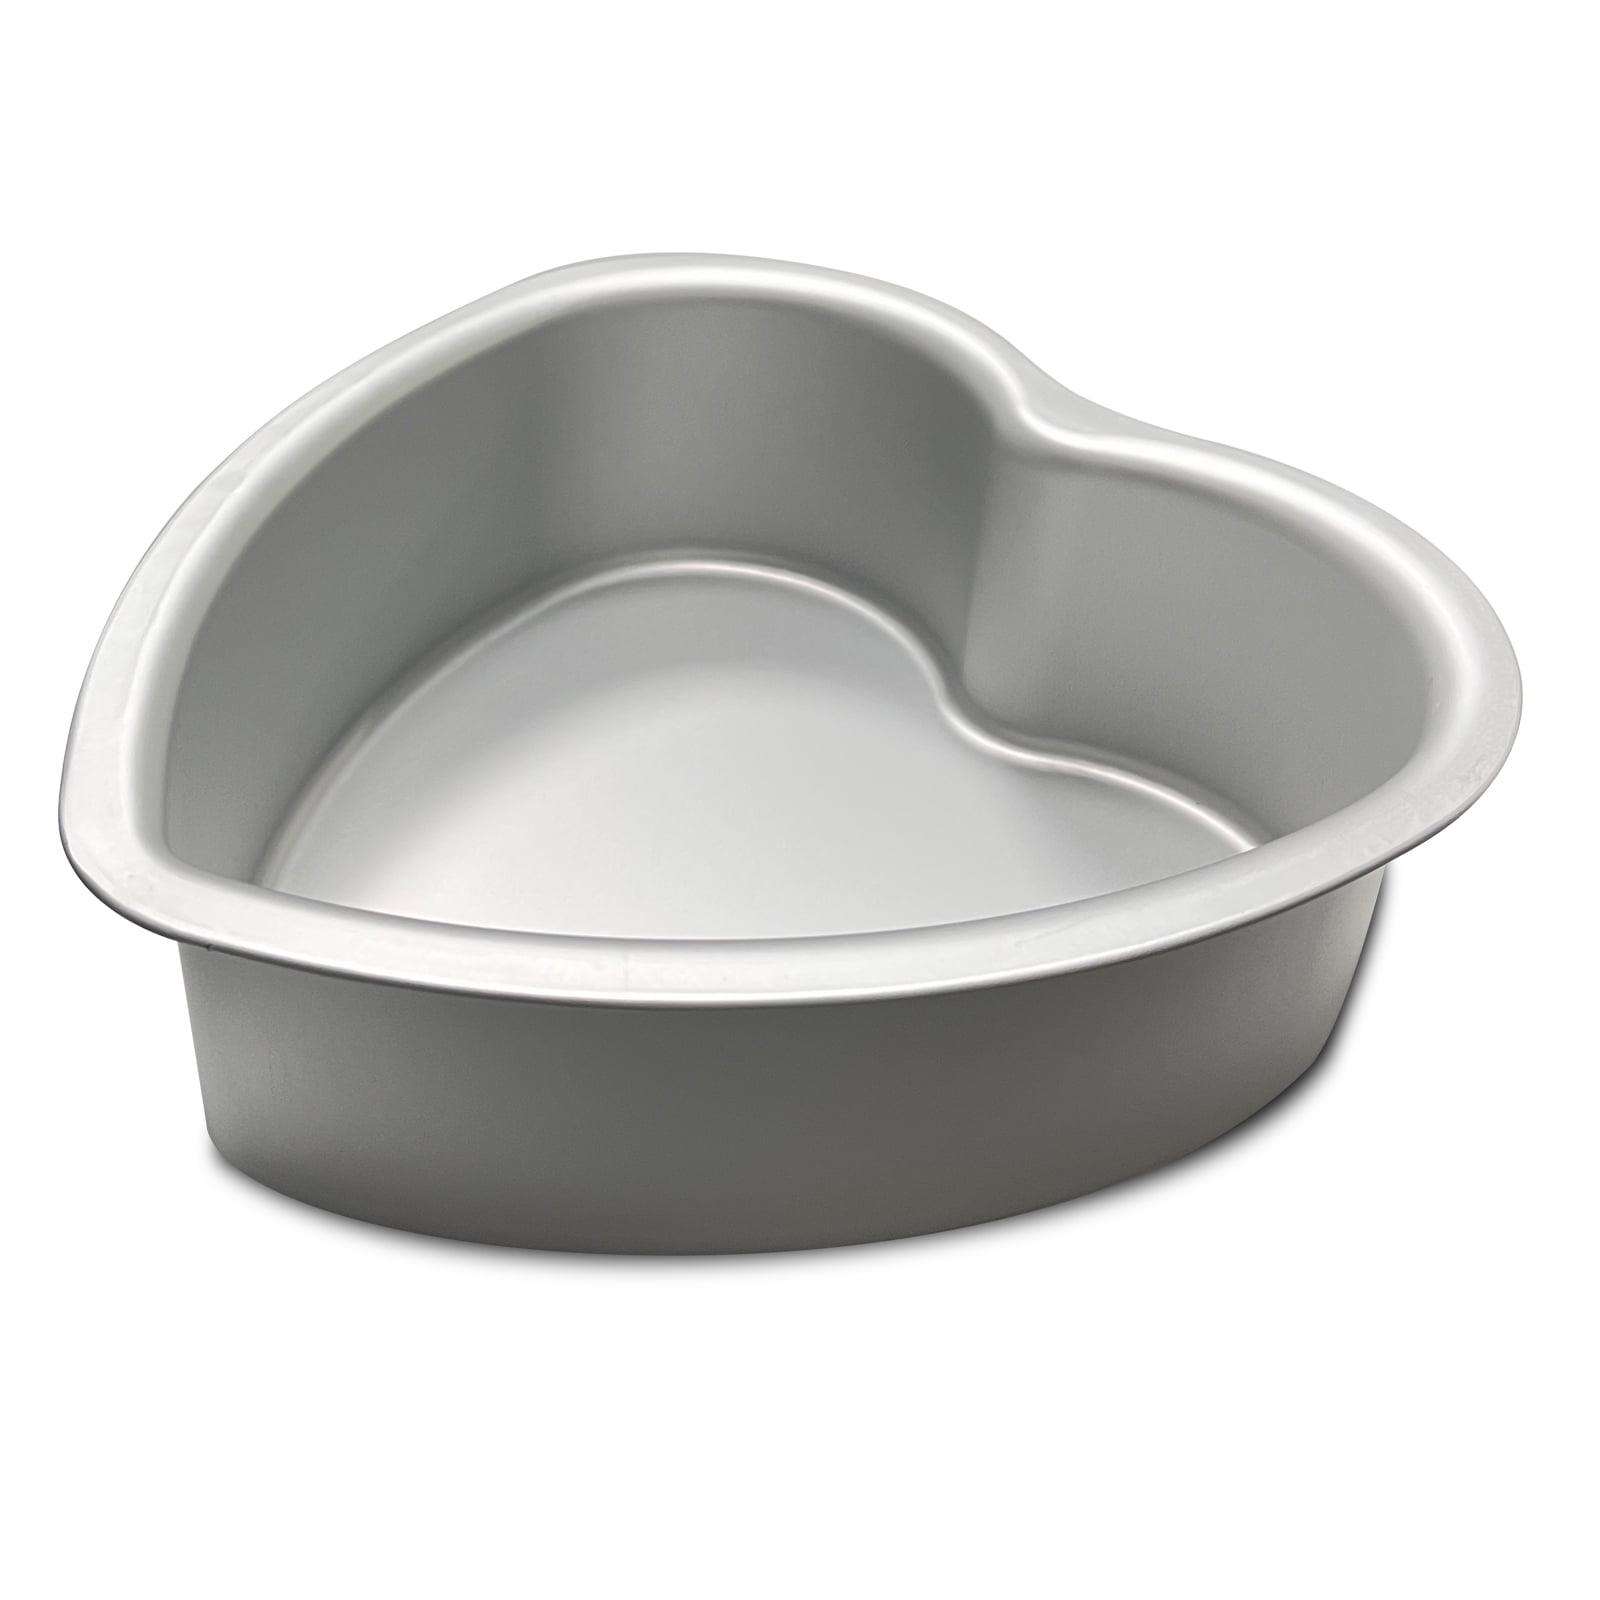  Kichvoe 7Inch Heart Shaped Cake Pan Cake Mold Removable Baking  Mold Fondant Mold Aluminum Cake Pan for Party Shop: Home & Kitchen